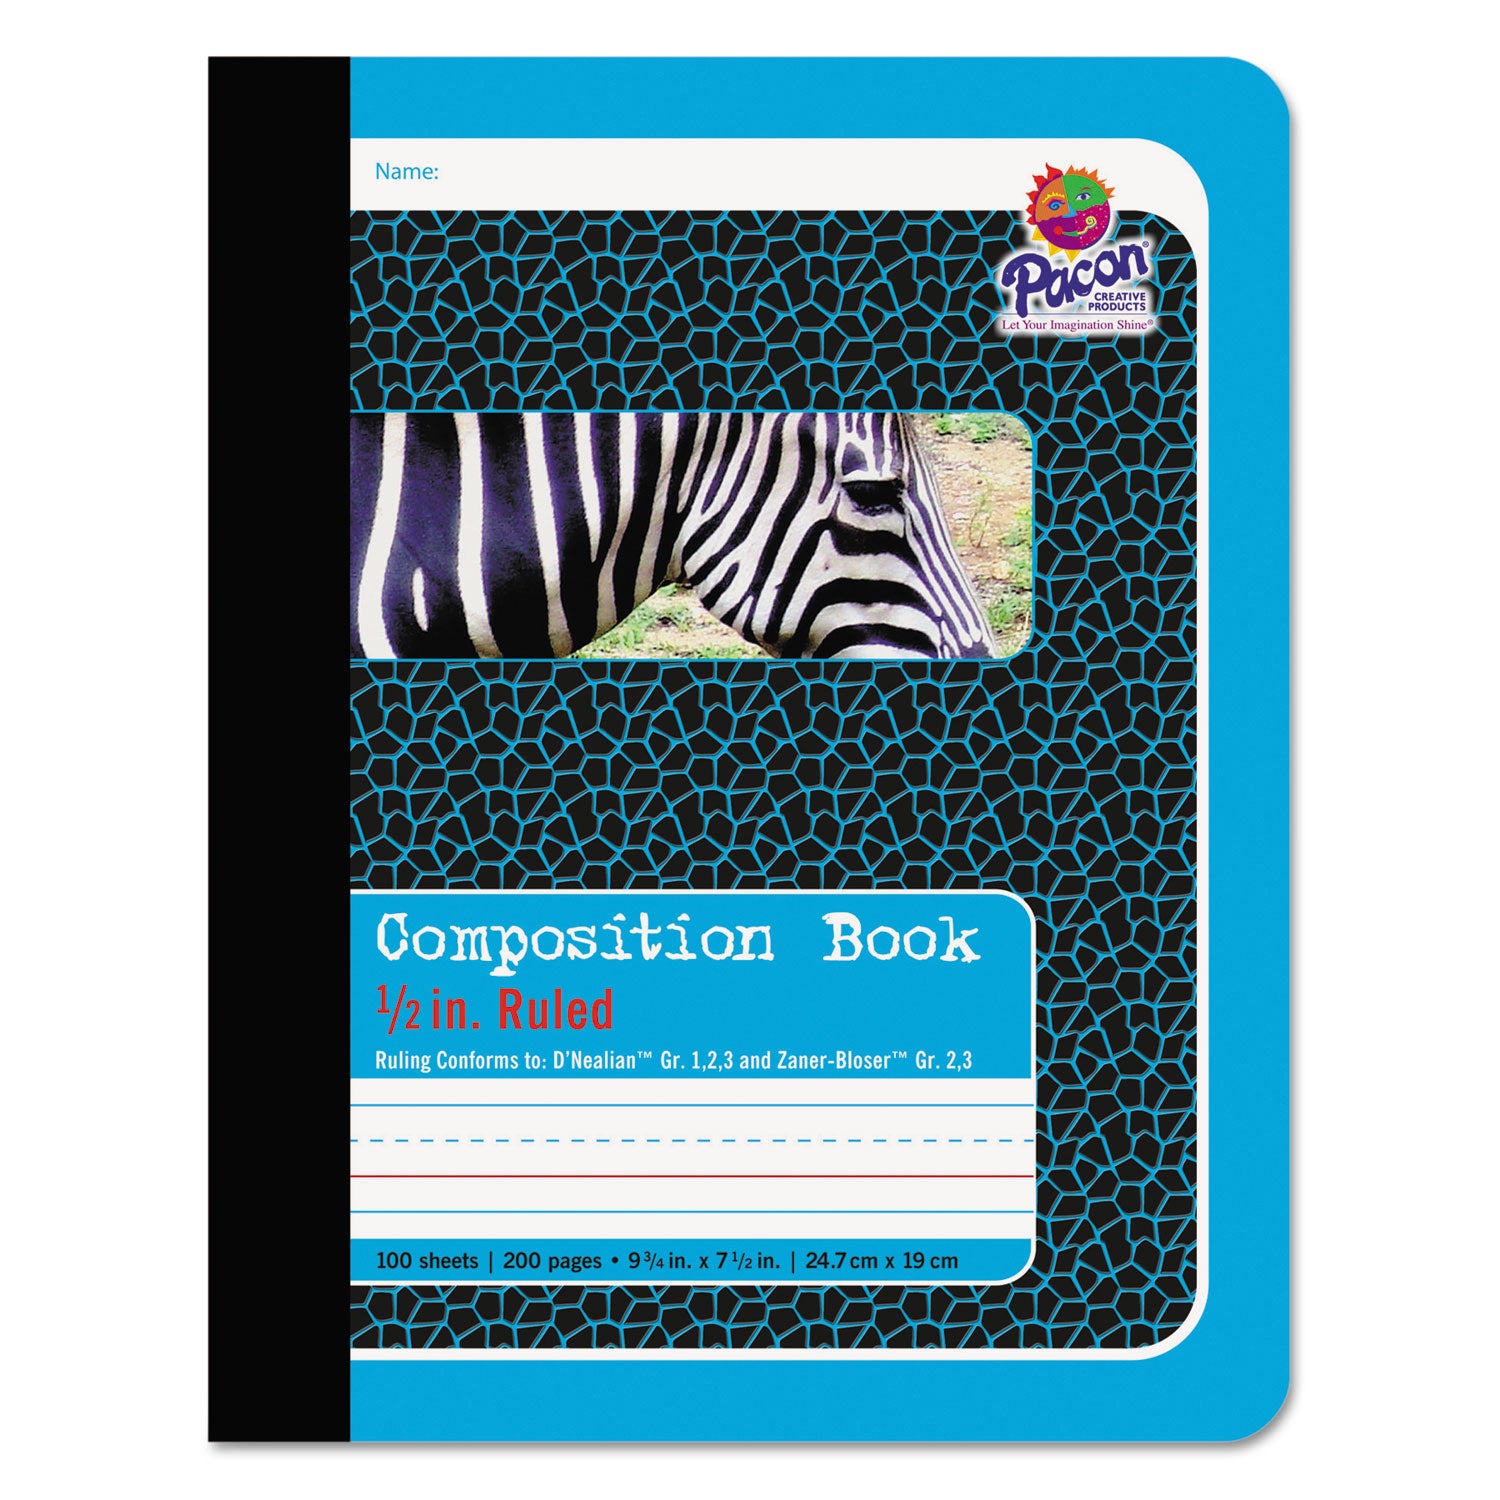 Composition Book, D'Nealian 1-3, Zaner-Bloser 2-3, Illustration Boxes/College Rule, Blue Cover, (100) 9.75 x 7.5 Sheets - 